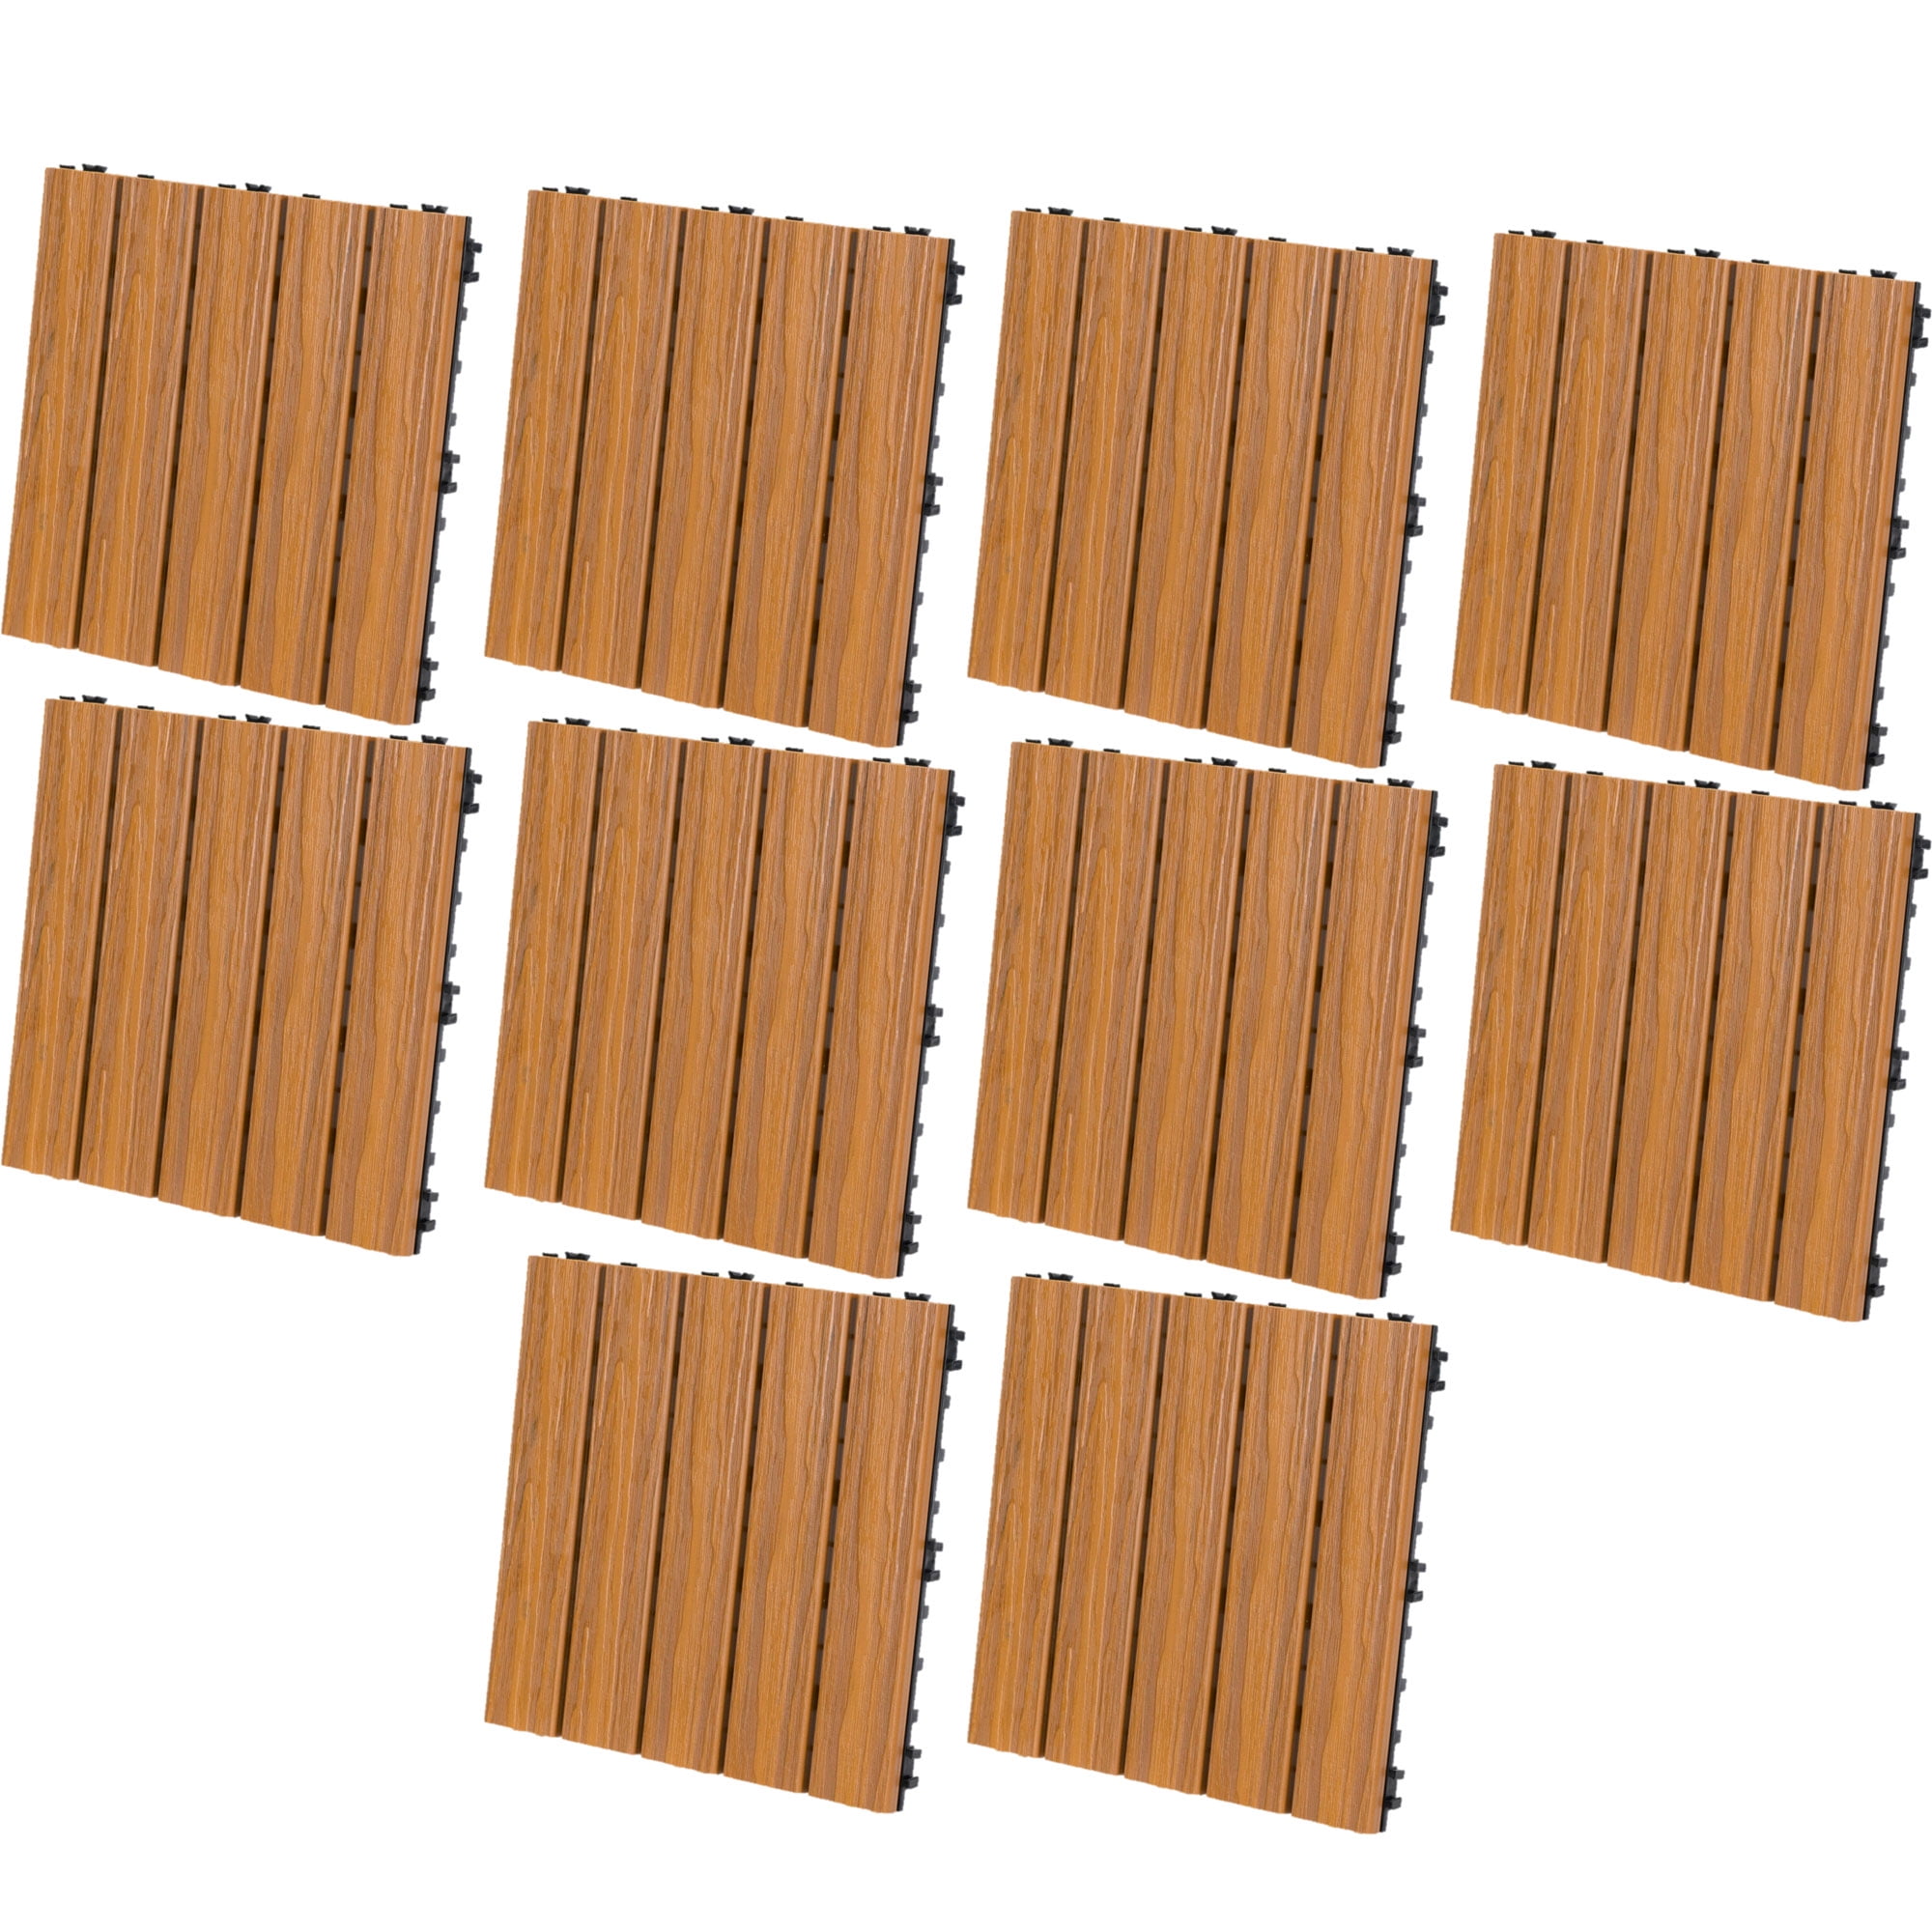 Cedar EON 12x24 Deck and Balcony Tiles Pack of 5 10 sq.ft./Pack 100% Engineered Polymer.